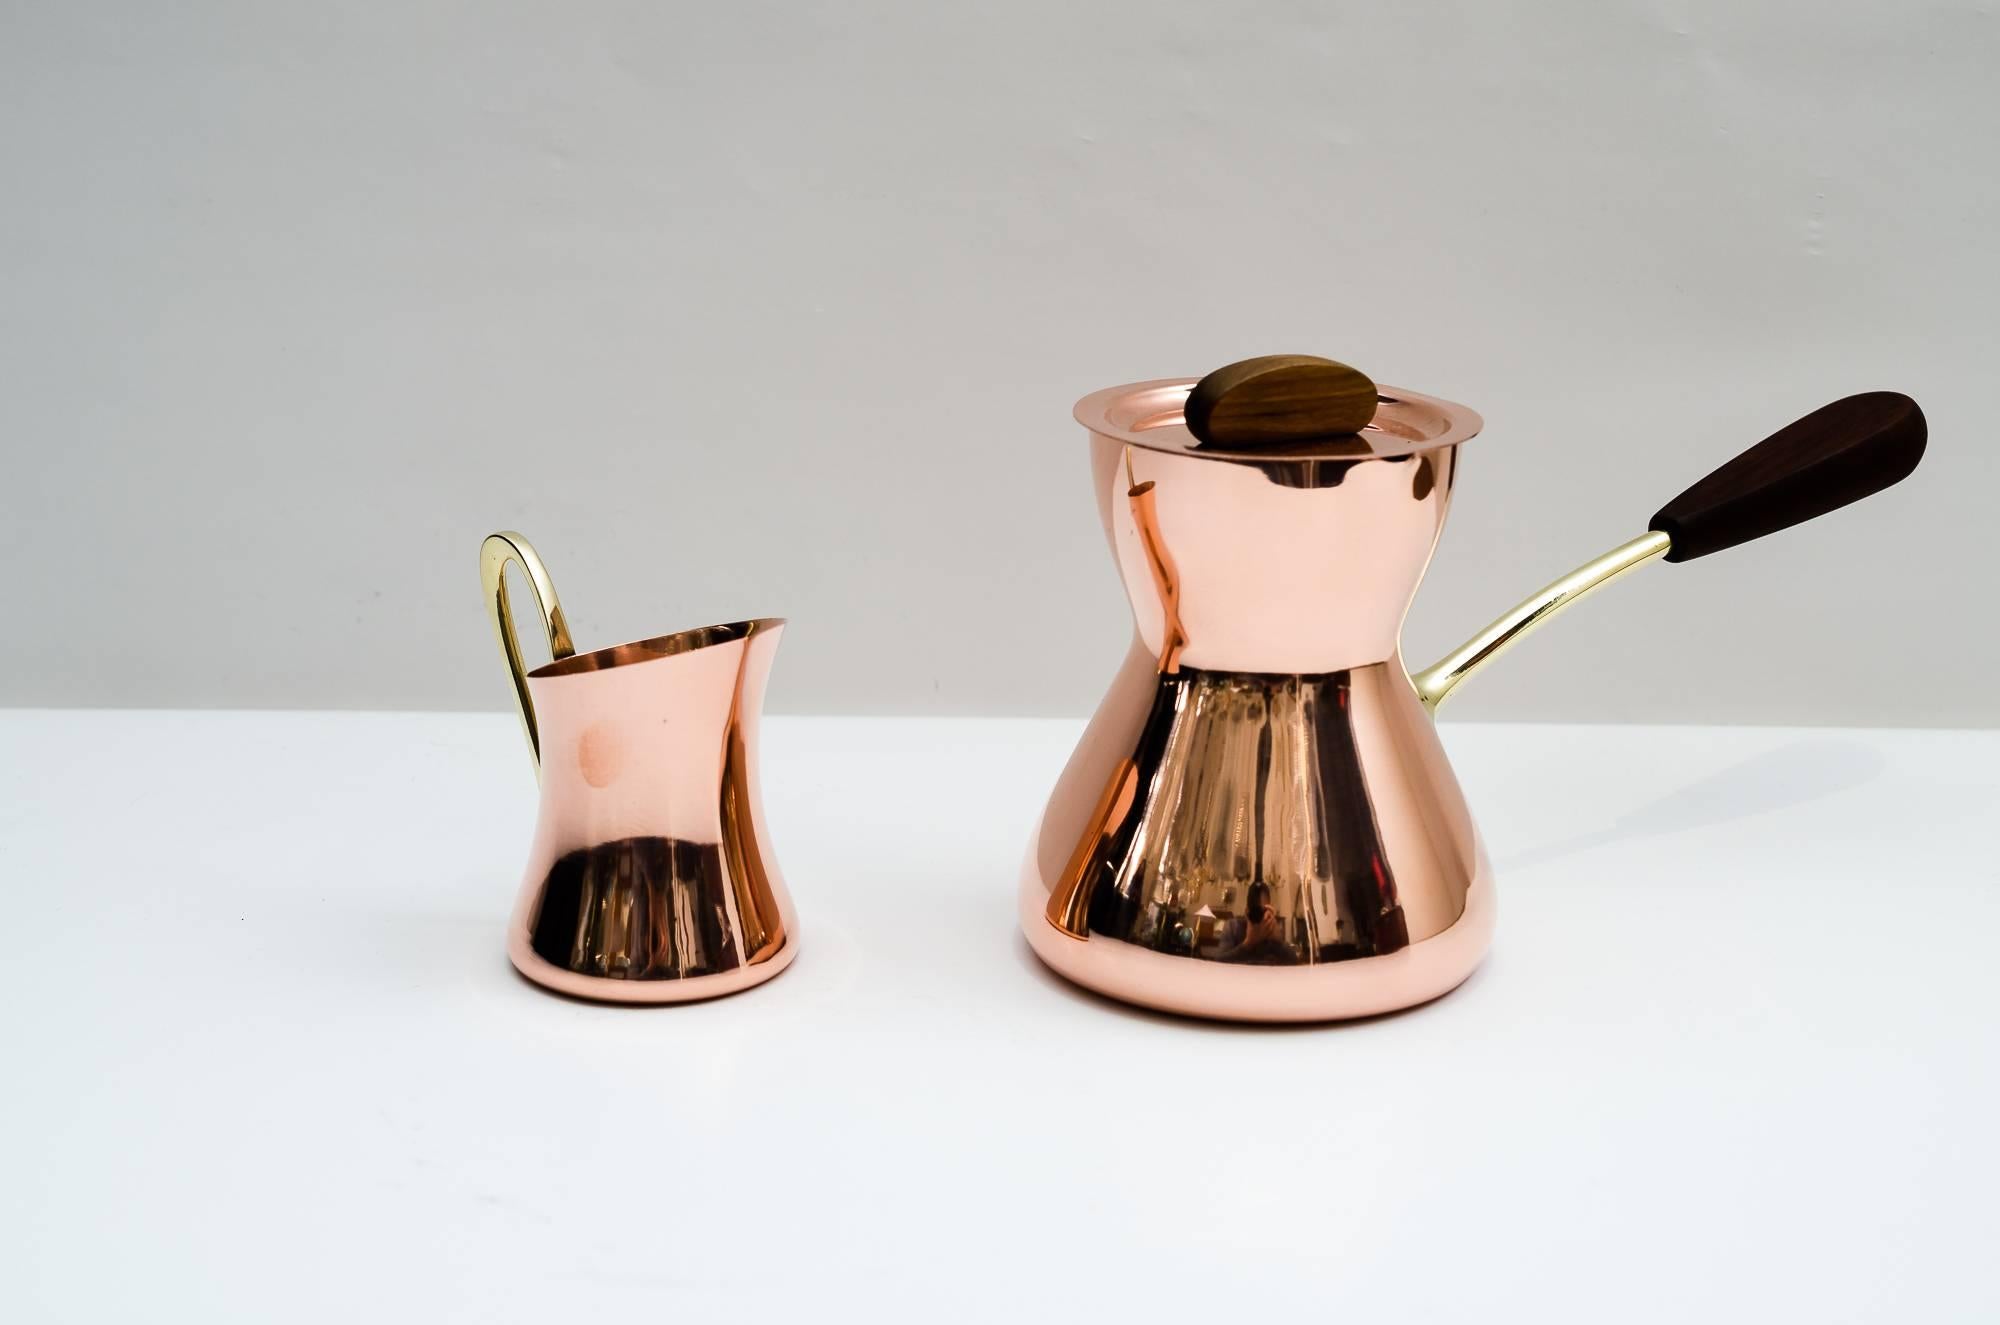 Coffee and milk can by Hagenauer
polished copper and brass.